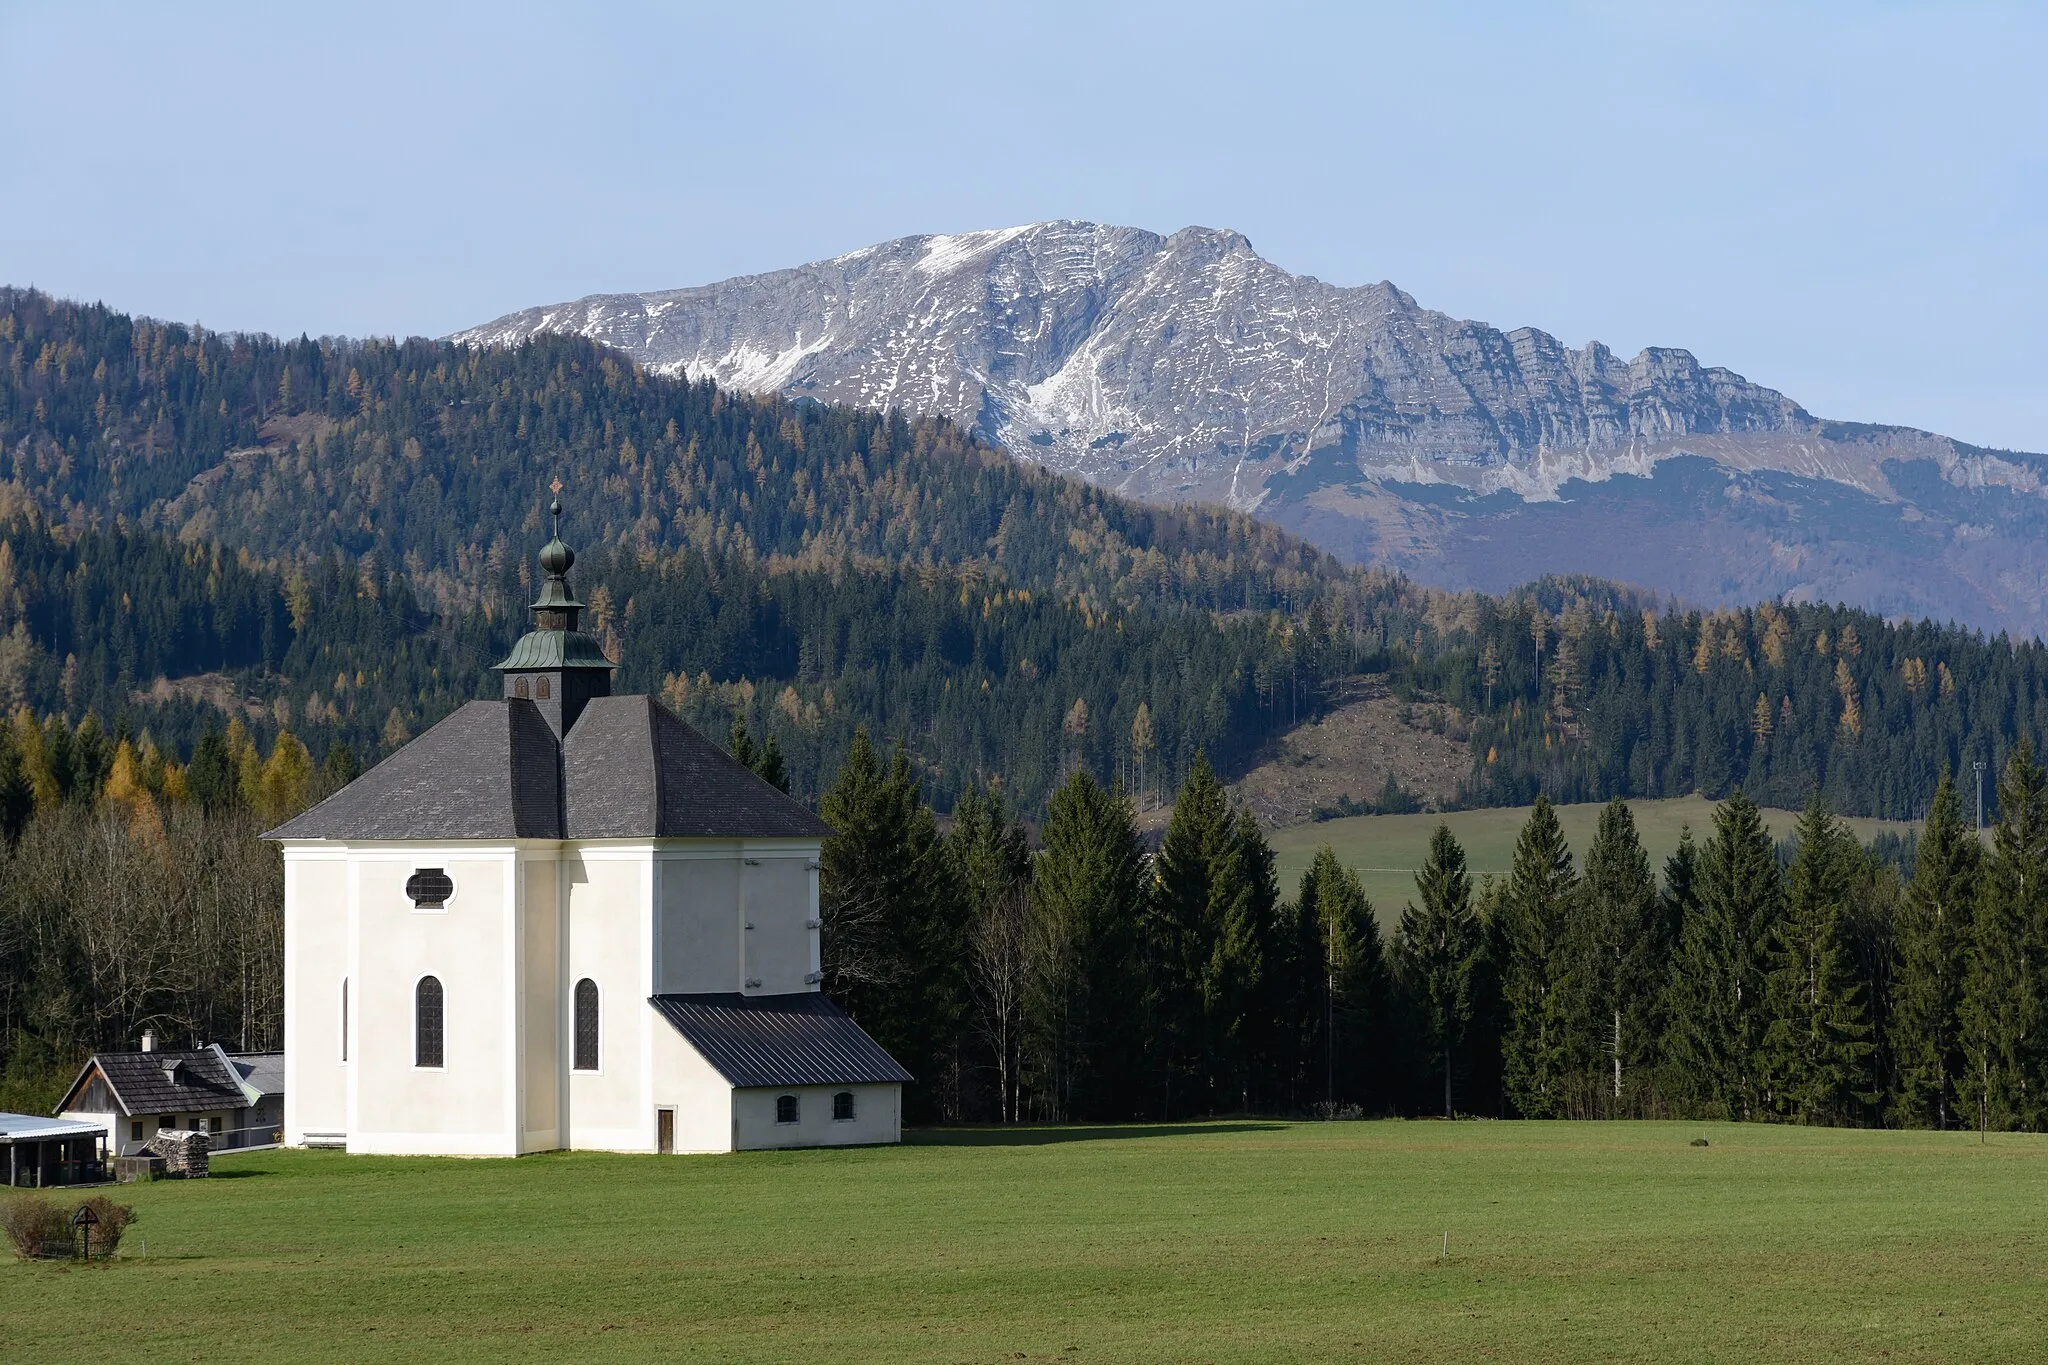 Photo showing: Subsidiary church St. Sebastian with the Ötscher (1,893 metres (6,211 ft)) - view from St. Sebastian, municipality of Mariazell, Styria, Austria